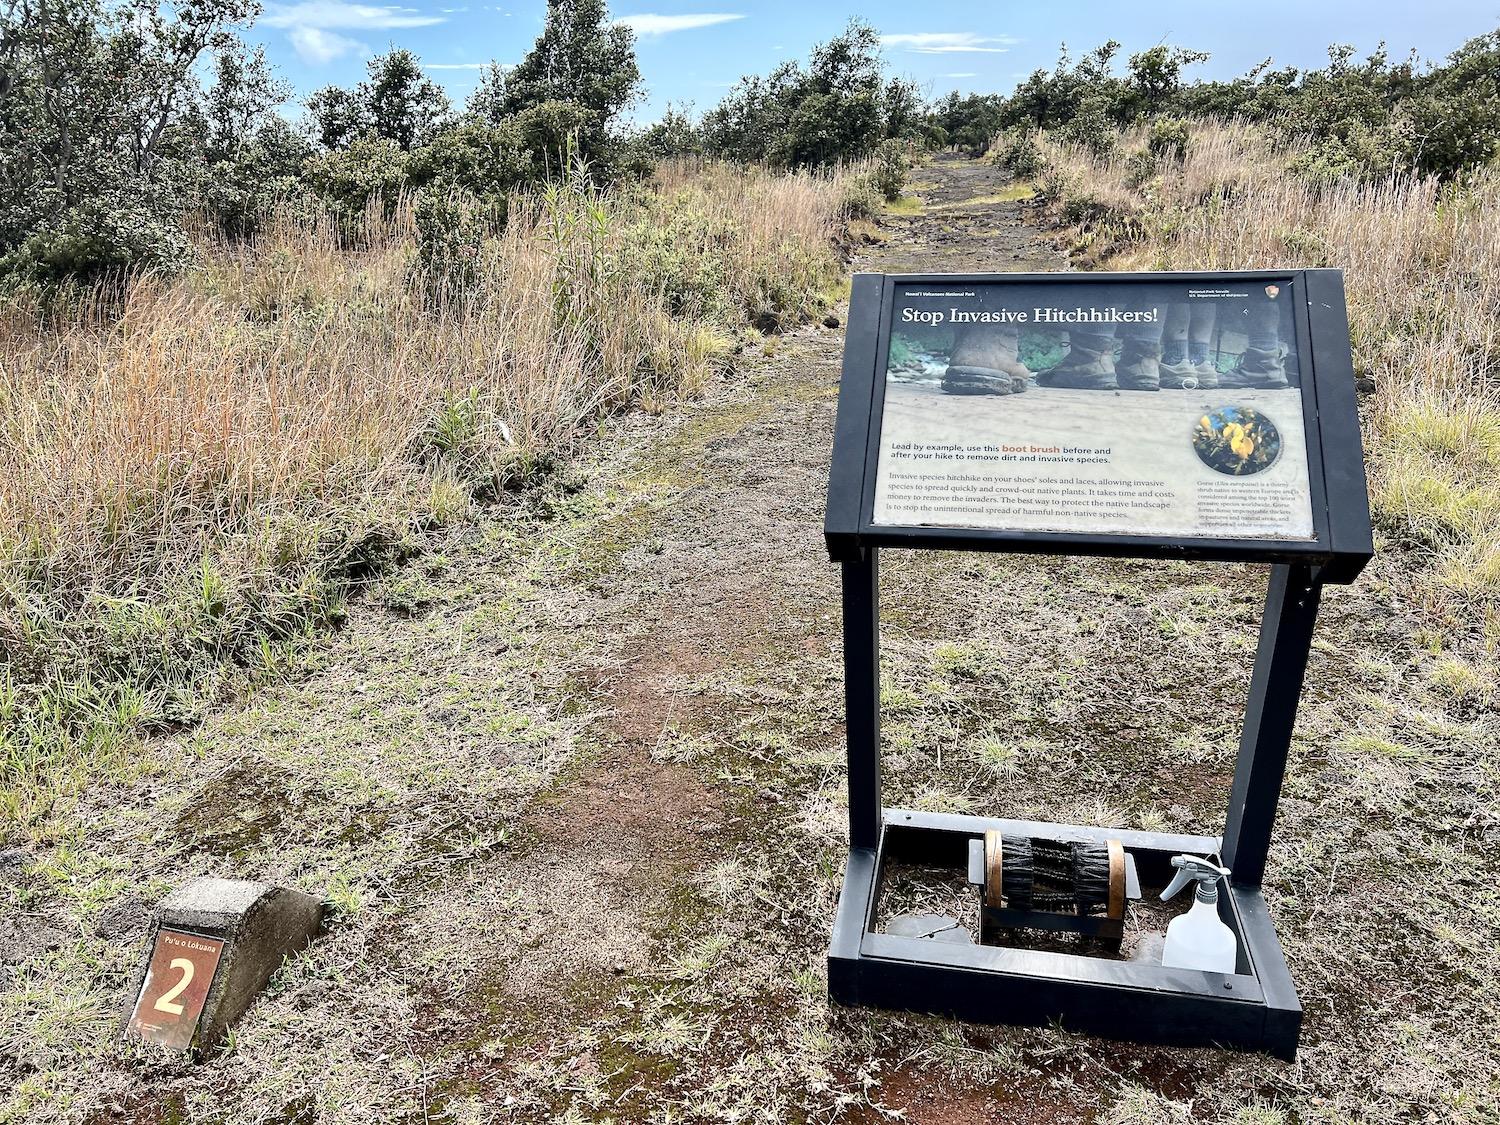 To stop invasive hitchhikers, the National Park Service asks visitors to brush and clean their footwear on their way into and out of sensitive areas, like here at the Kahuku Unit of Hawaiʻi Volcanoes National Park.